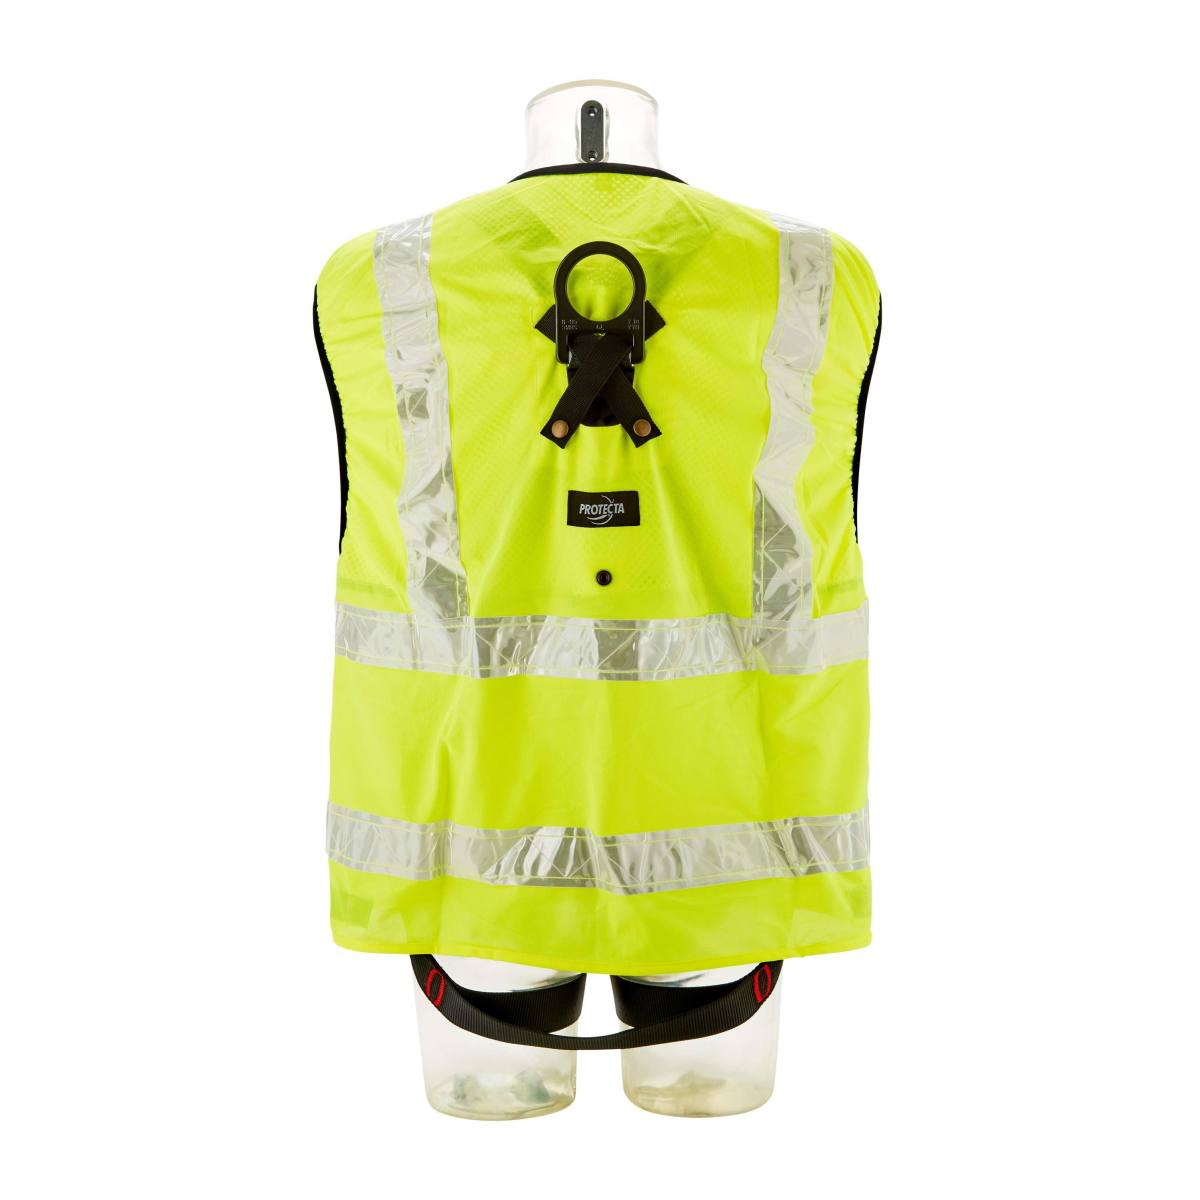 3M PROTECTA Safety harness - chest and rear fall arrest eyelets neon yellow high-visibility waistcoat Standard VS chest and rear fall indicators Belt end depot Label protection with labelling field black coated fittings Lanyard holder M/L